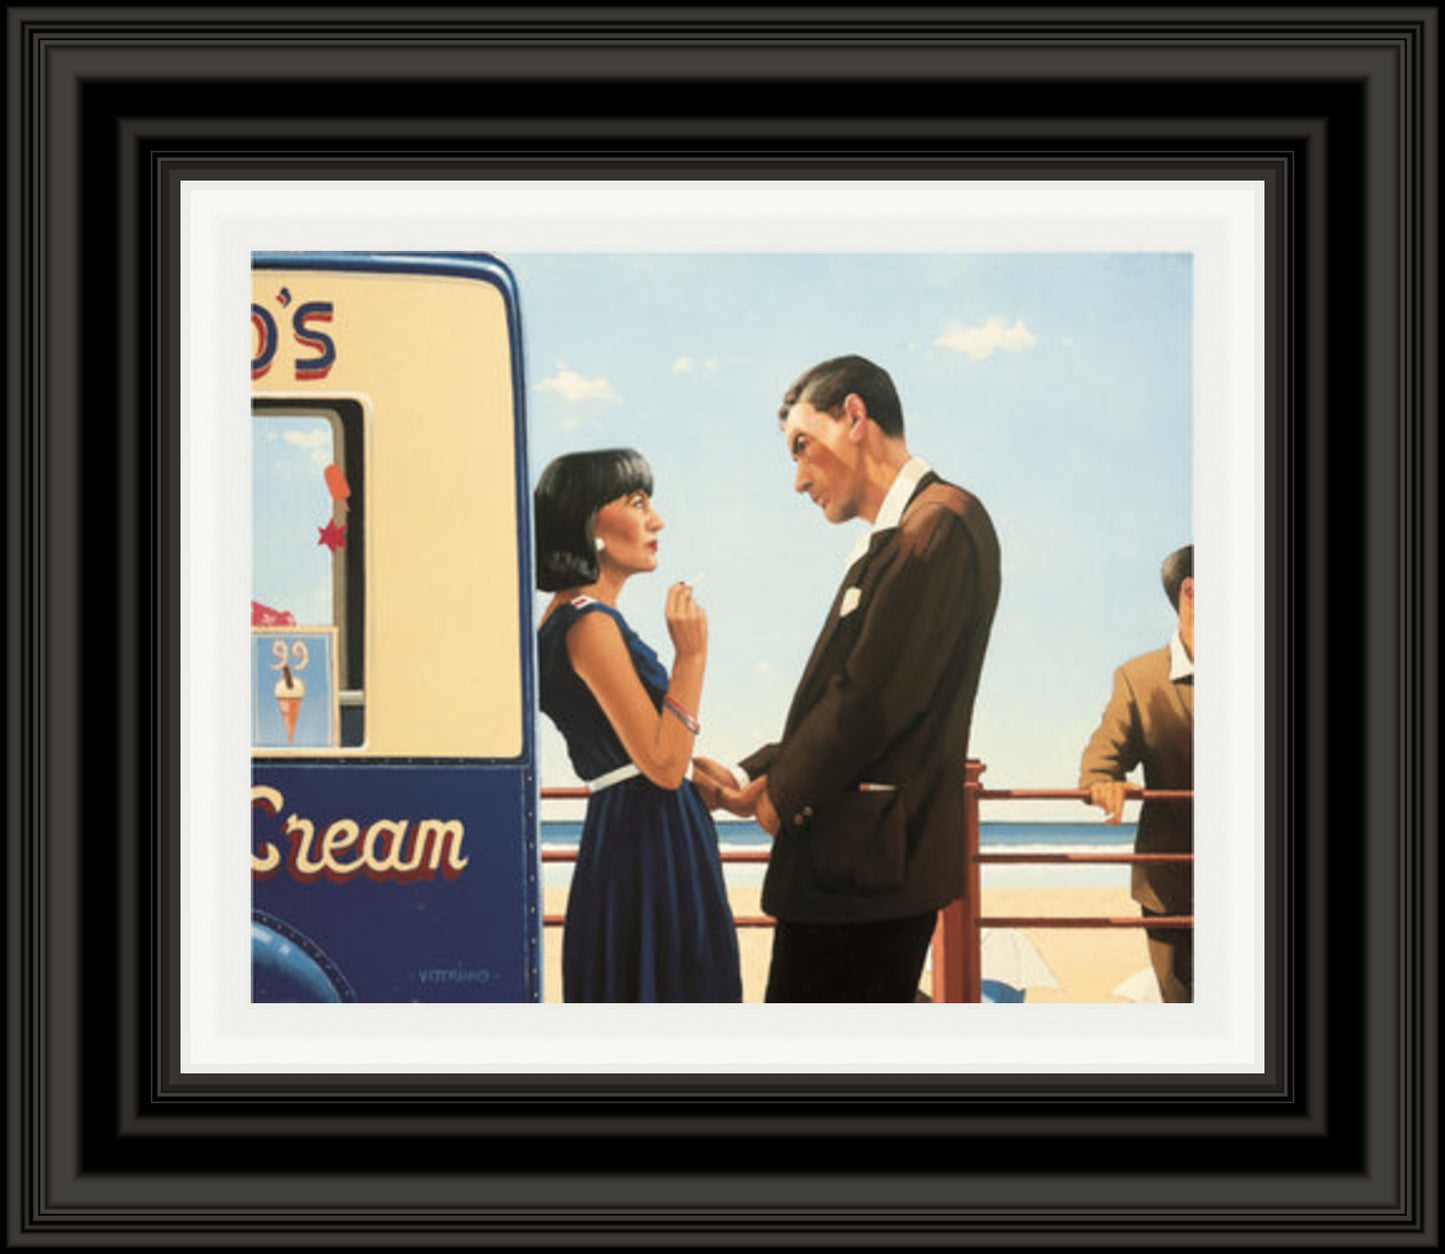 The Lying Game by Jack Vettriano